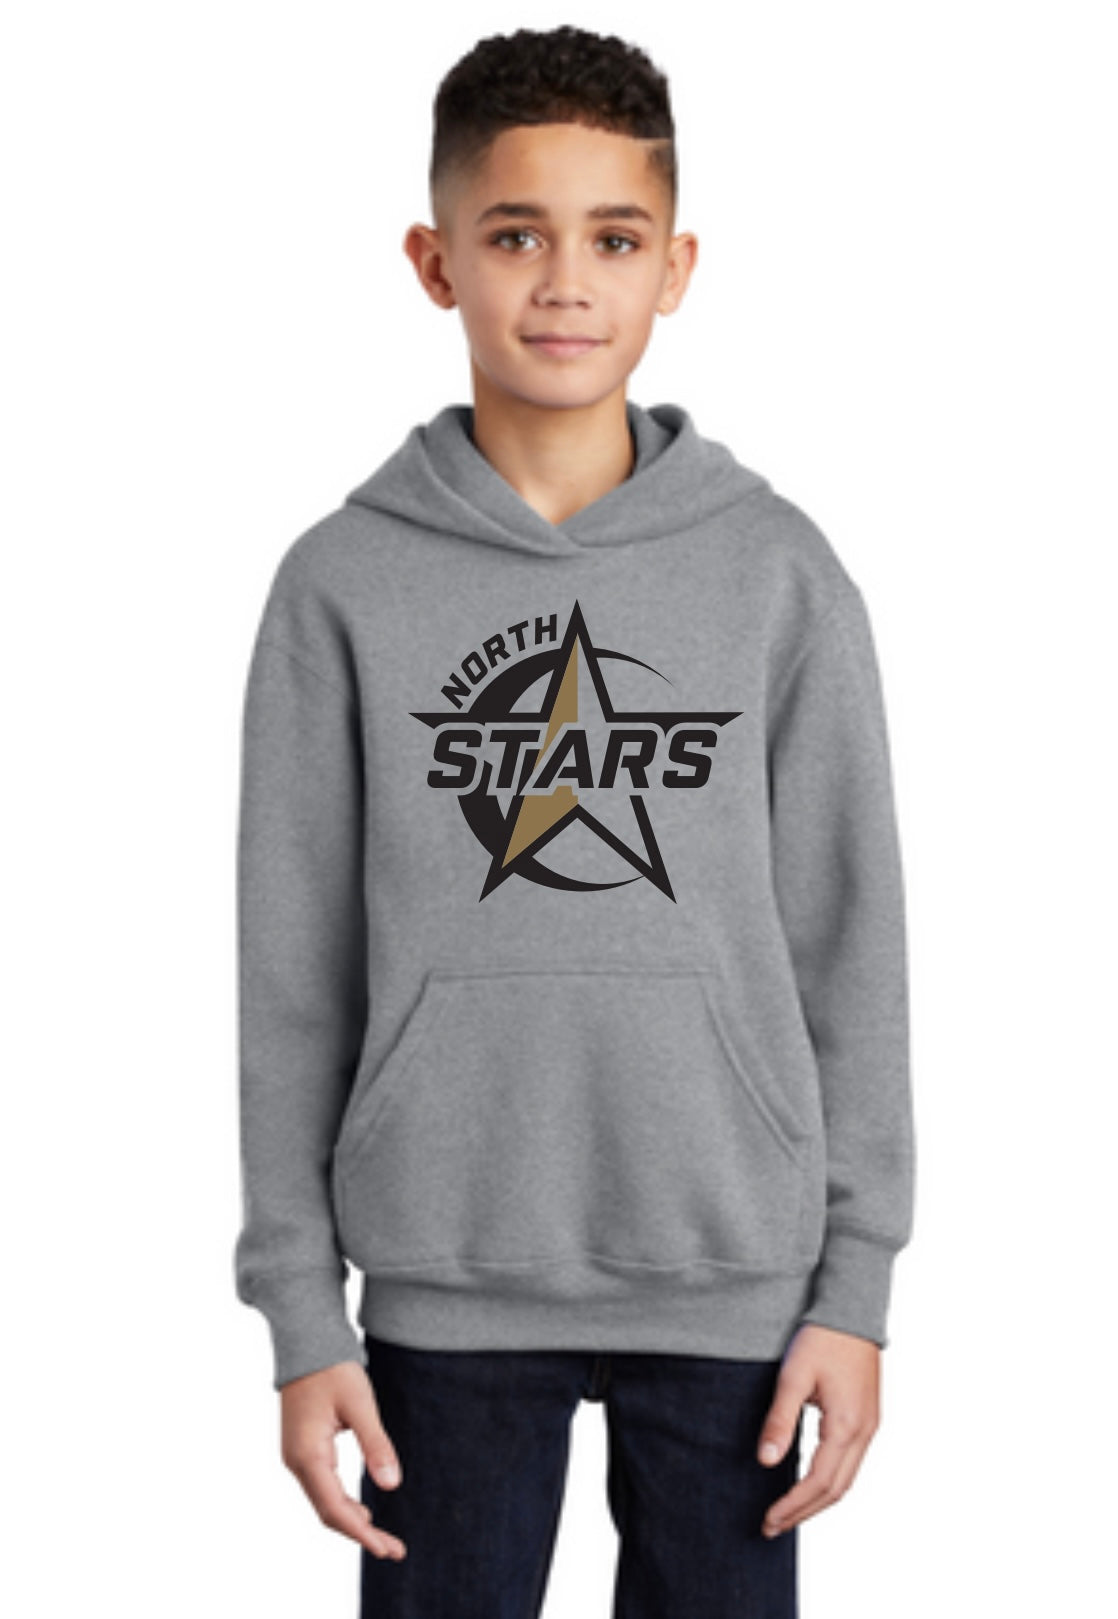 North Stars Youth Cotton Hoodie